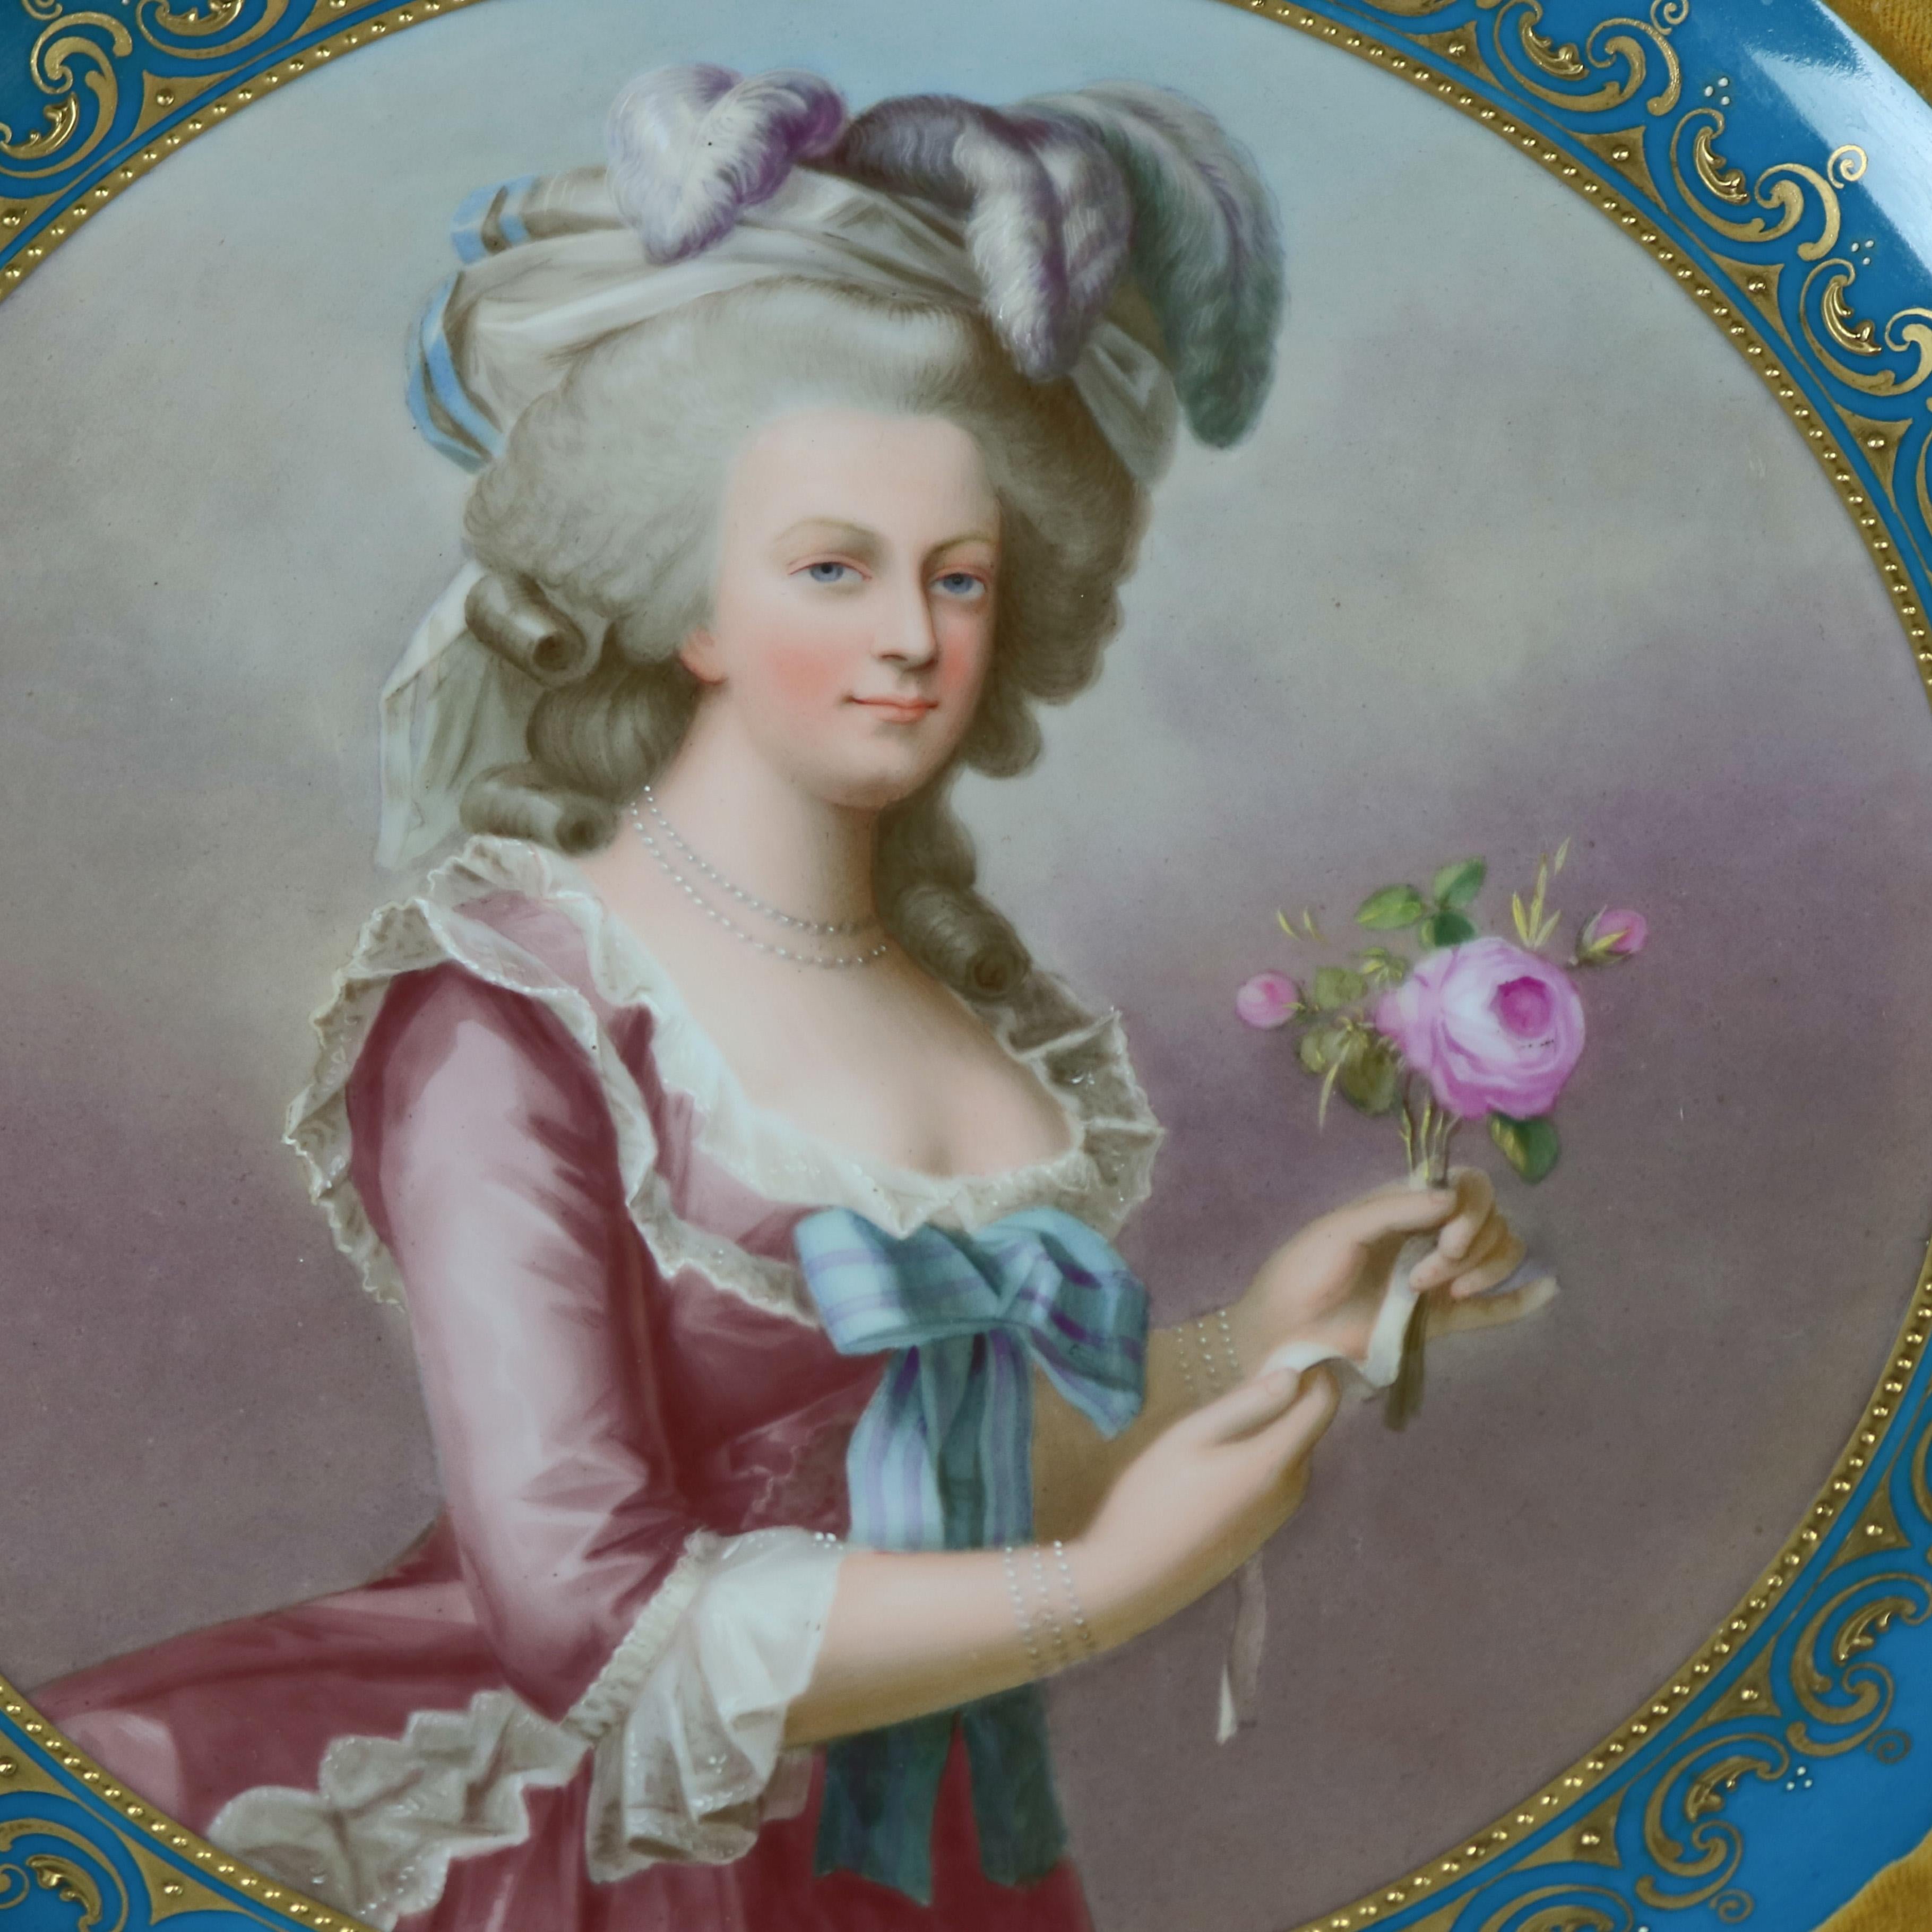 An antique Royal Vienna Porcelain plate/plaque depicts hand painted and artist-signed portrait of Marie Antoinette with gilt decorated rim and seated in giltwood and velvet frame, circa 1890.

Measures: 20